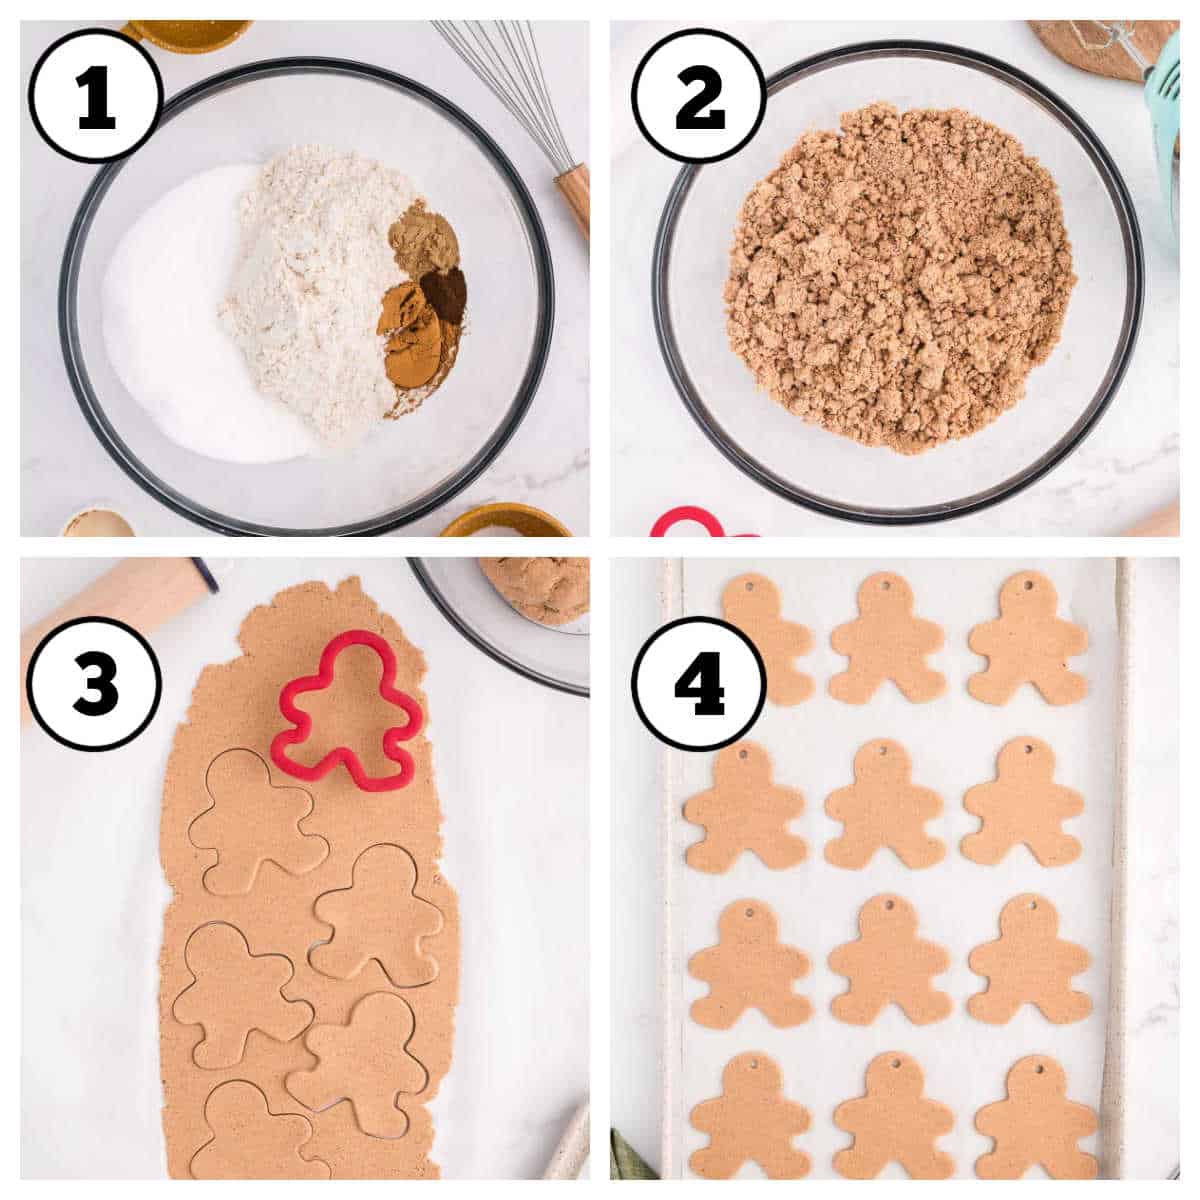 Image collage showing how to make gingerbread ornaments.